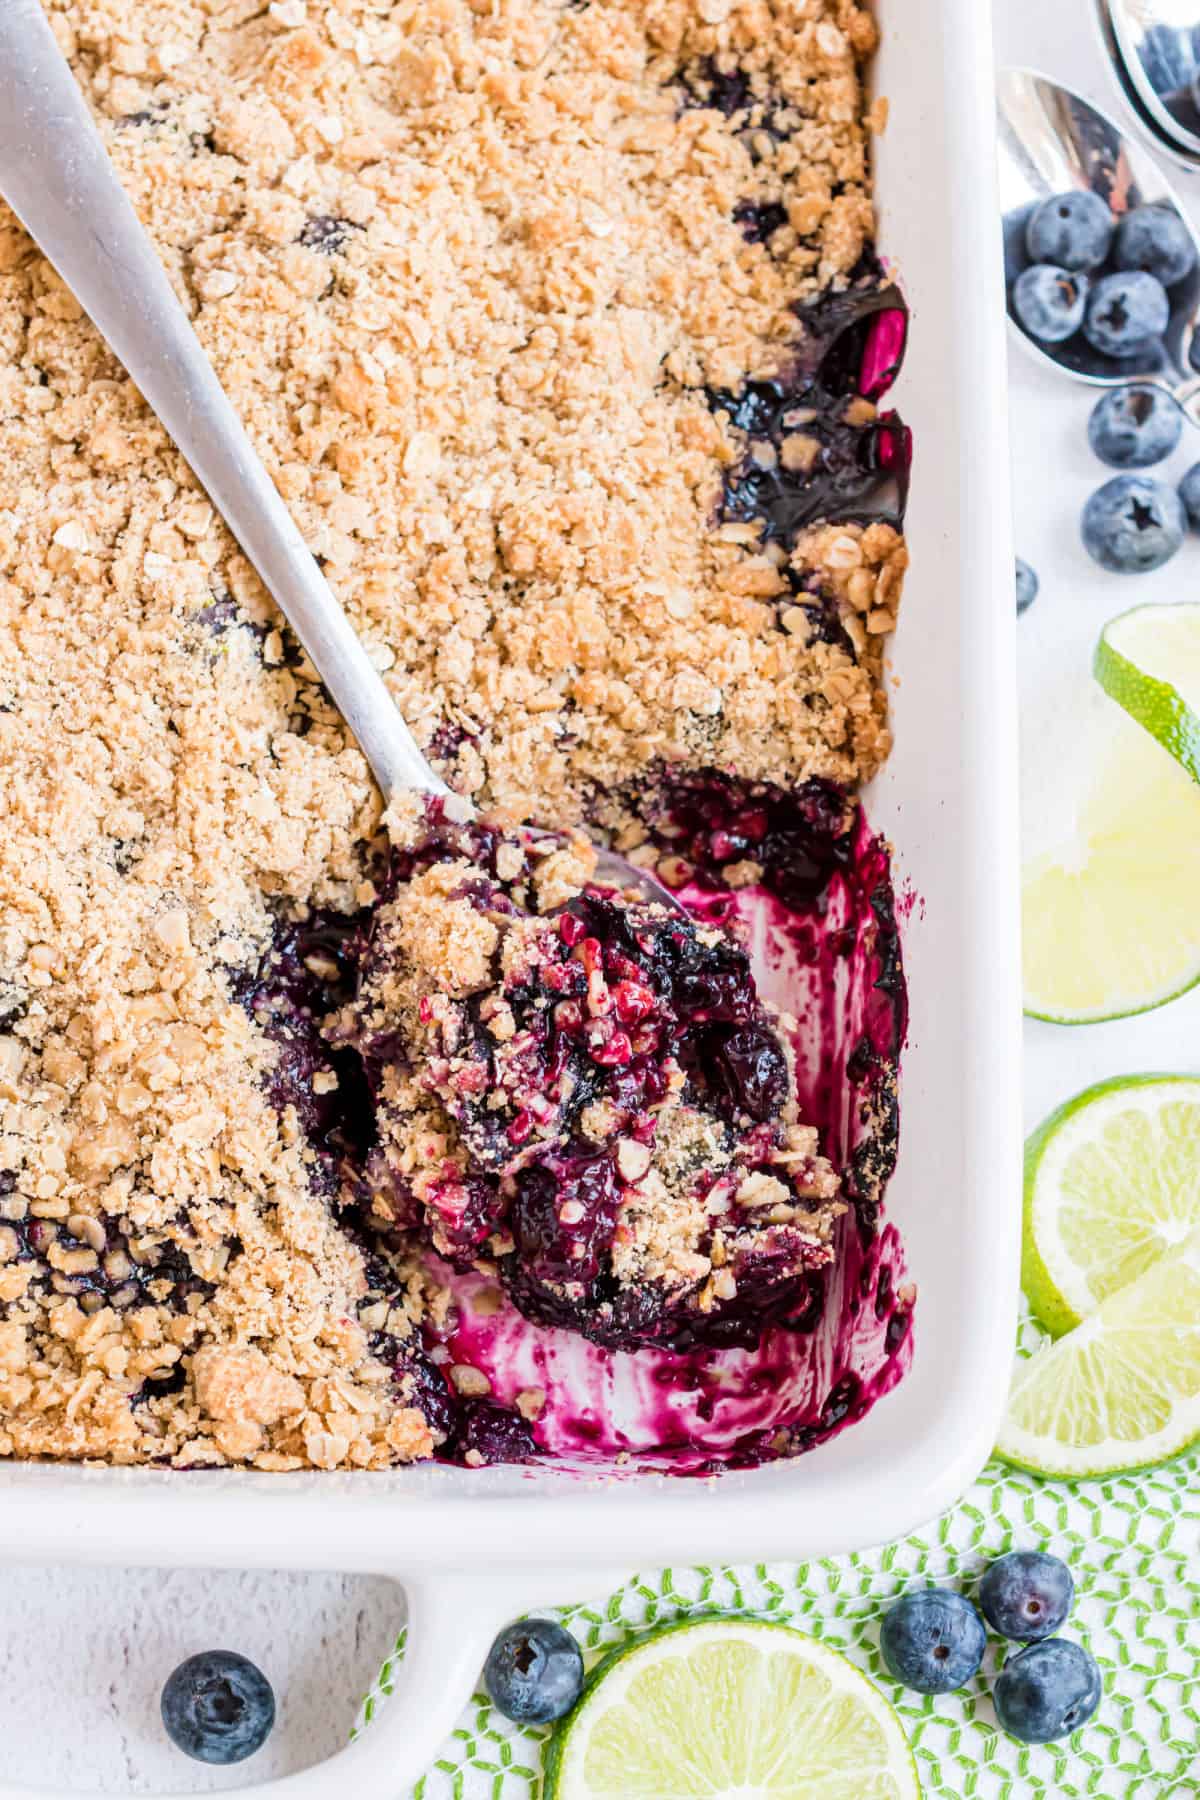 Blueberry crumble baked in a white dish with a spoon scooping it out.